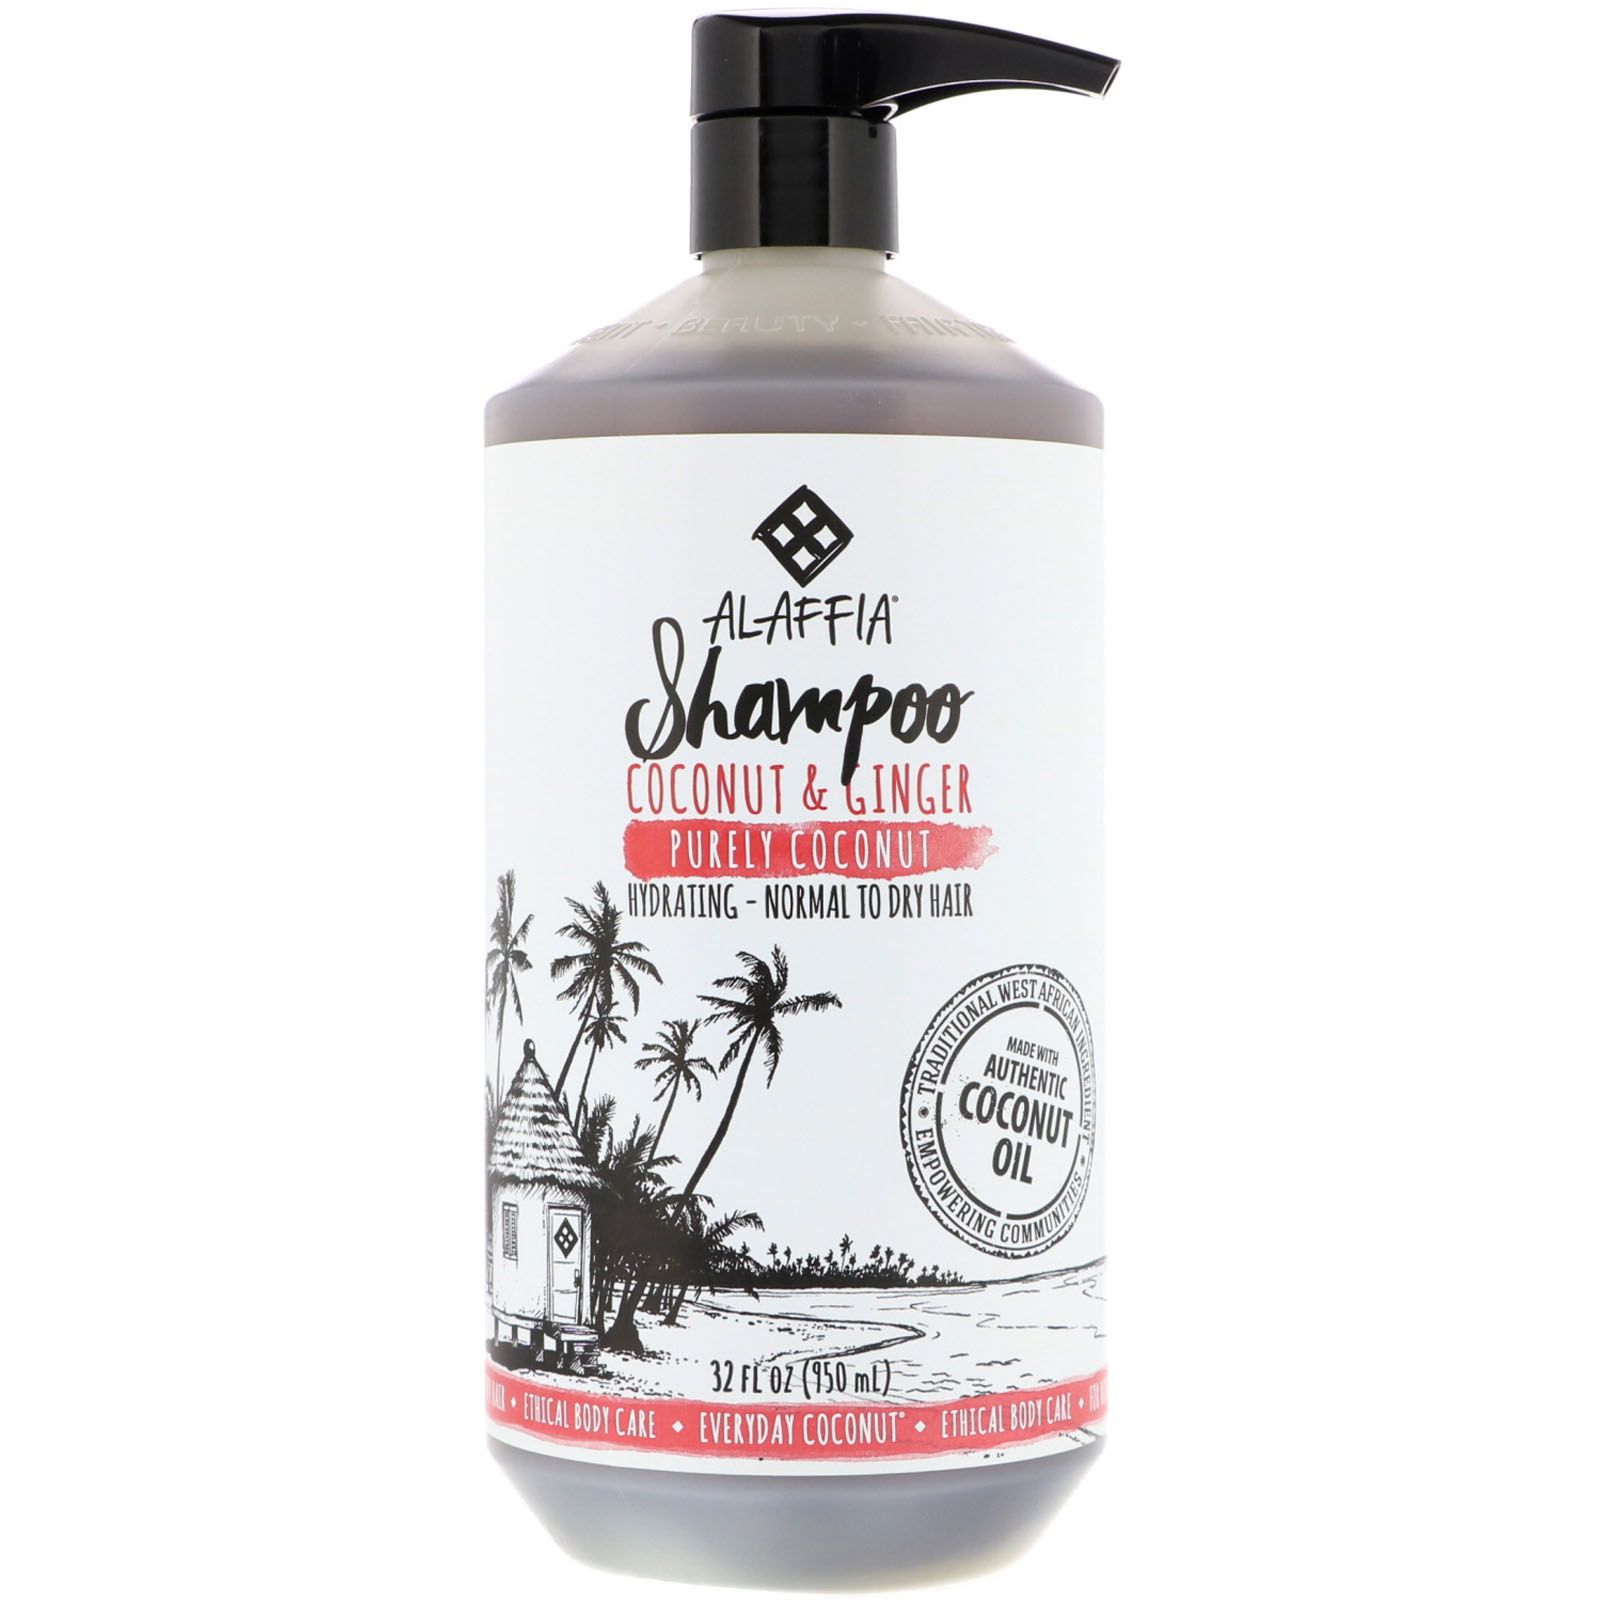 Everyday Coconut Shampoo Hydrating Normal to Dry Hair Purely Coconut 32 fl oz (950 ml)